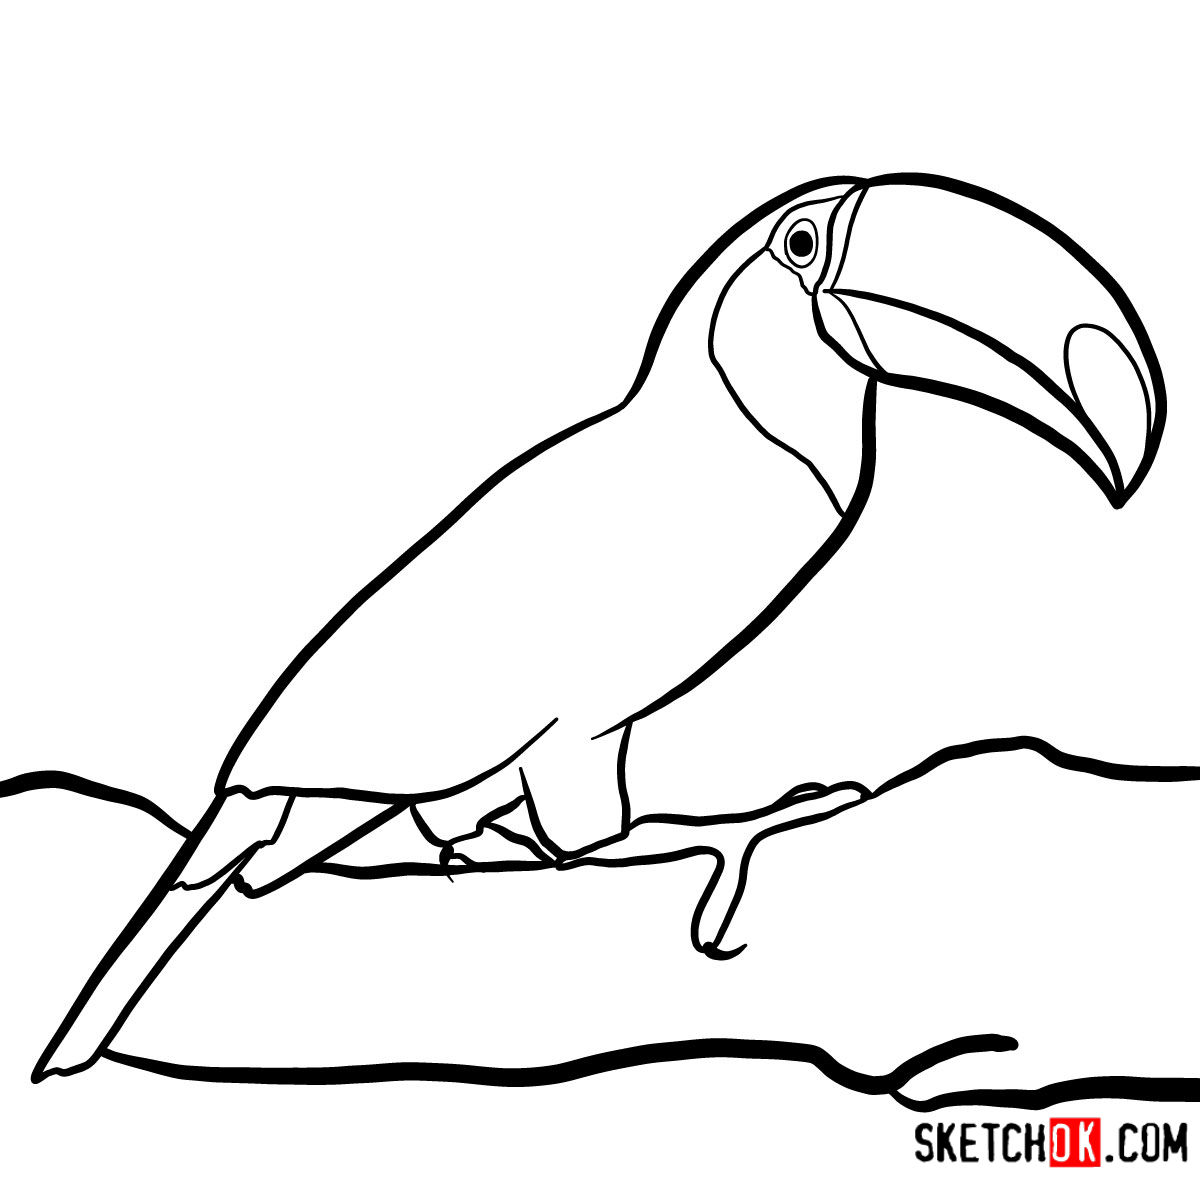 How to draw a Toucan